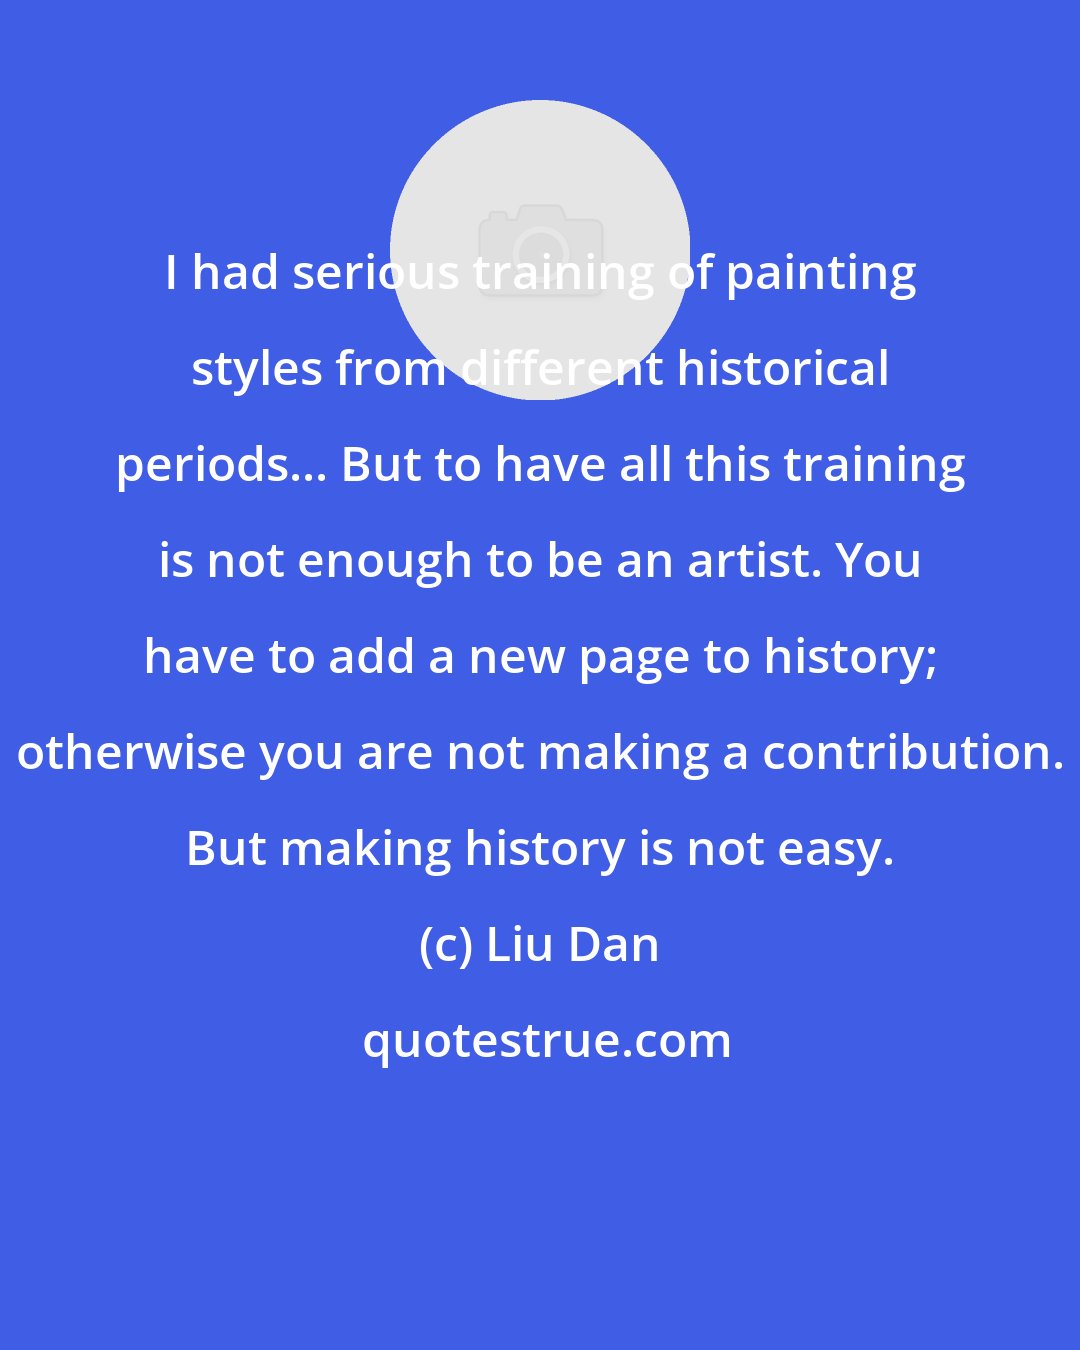 Liu Dan: I had serious training of painting styles from different historical periods... But to have all this training is not enough to be an artist. You have to add a new page to history; otherwise you are not making a contribution. But making history is not easy.